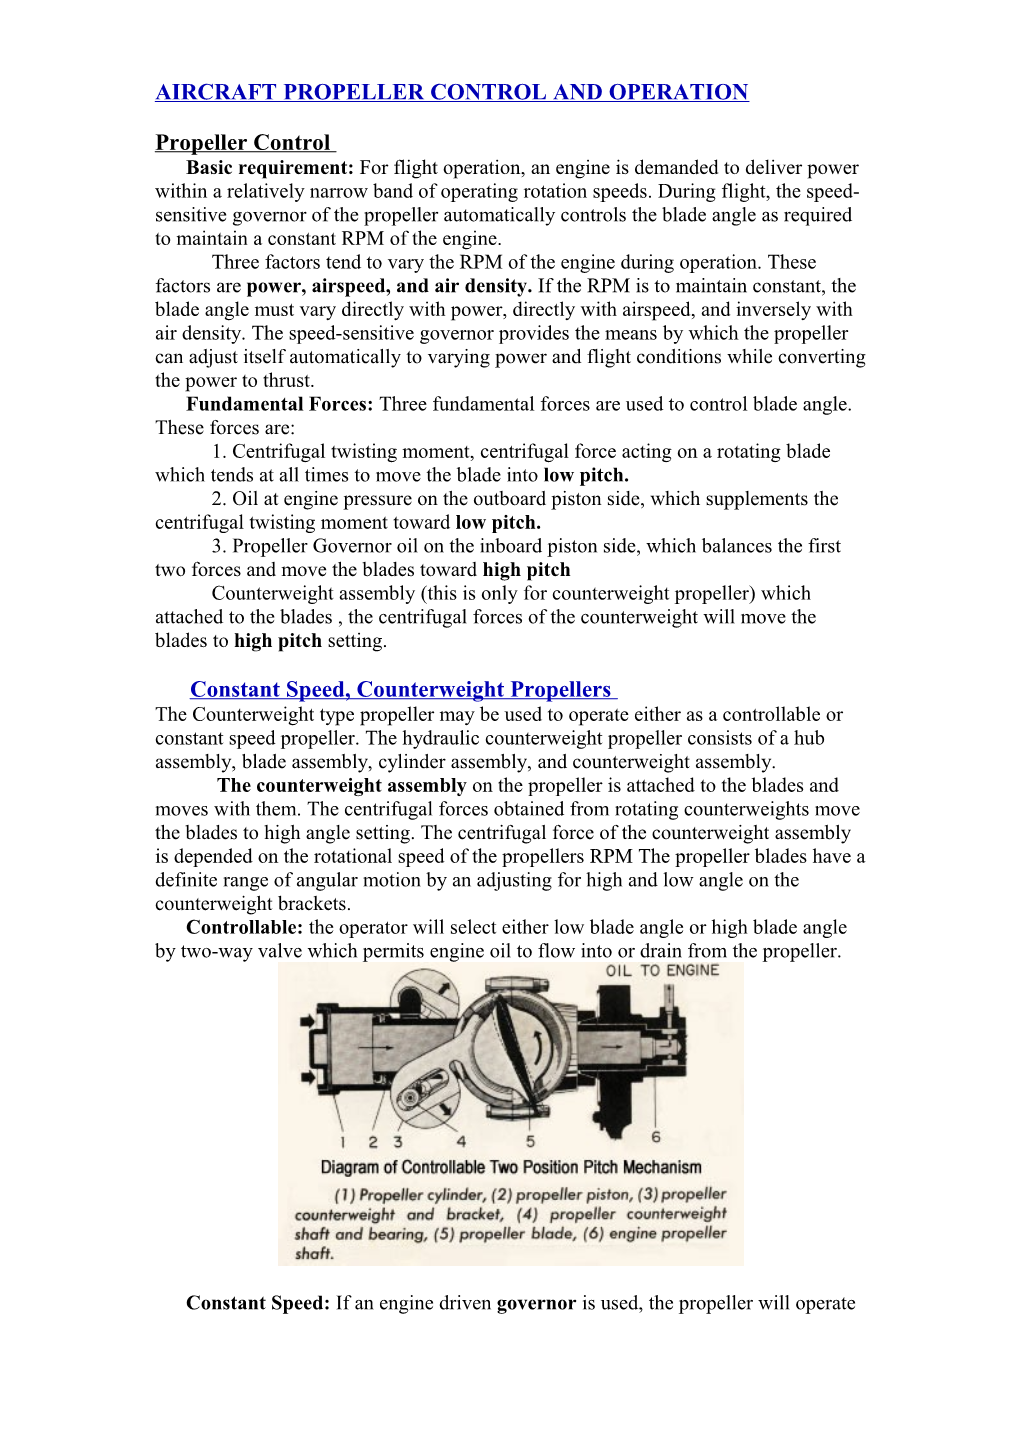 Aircraft Propeller Control and Operation